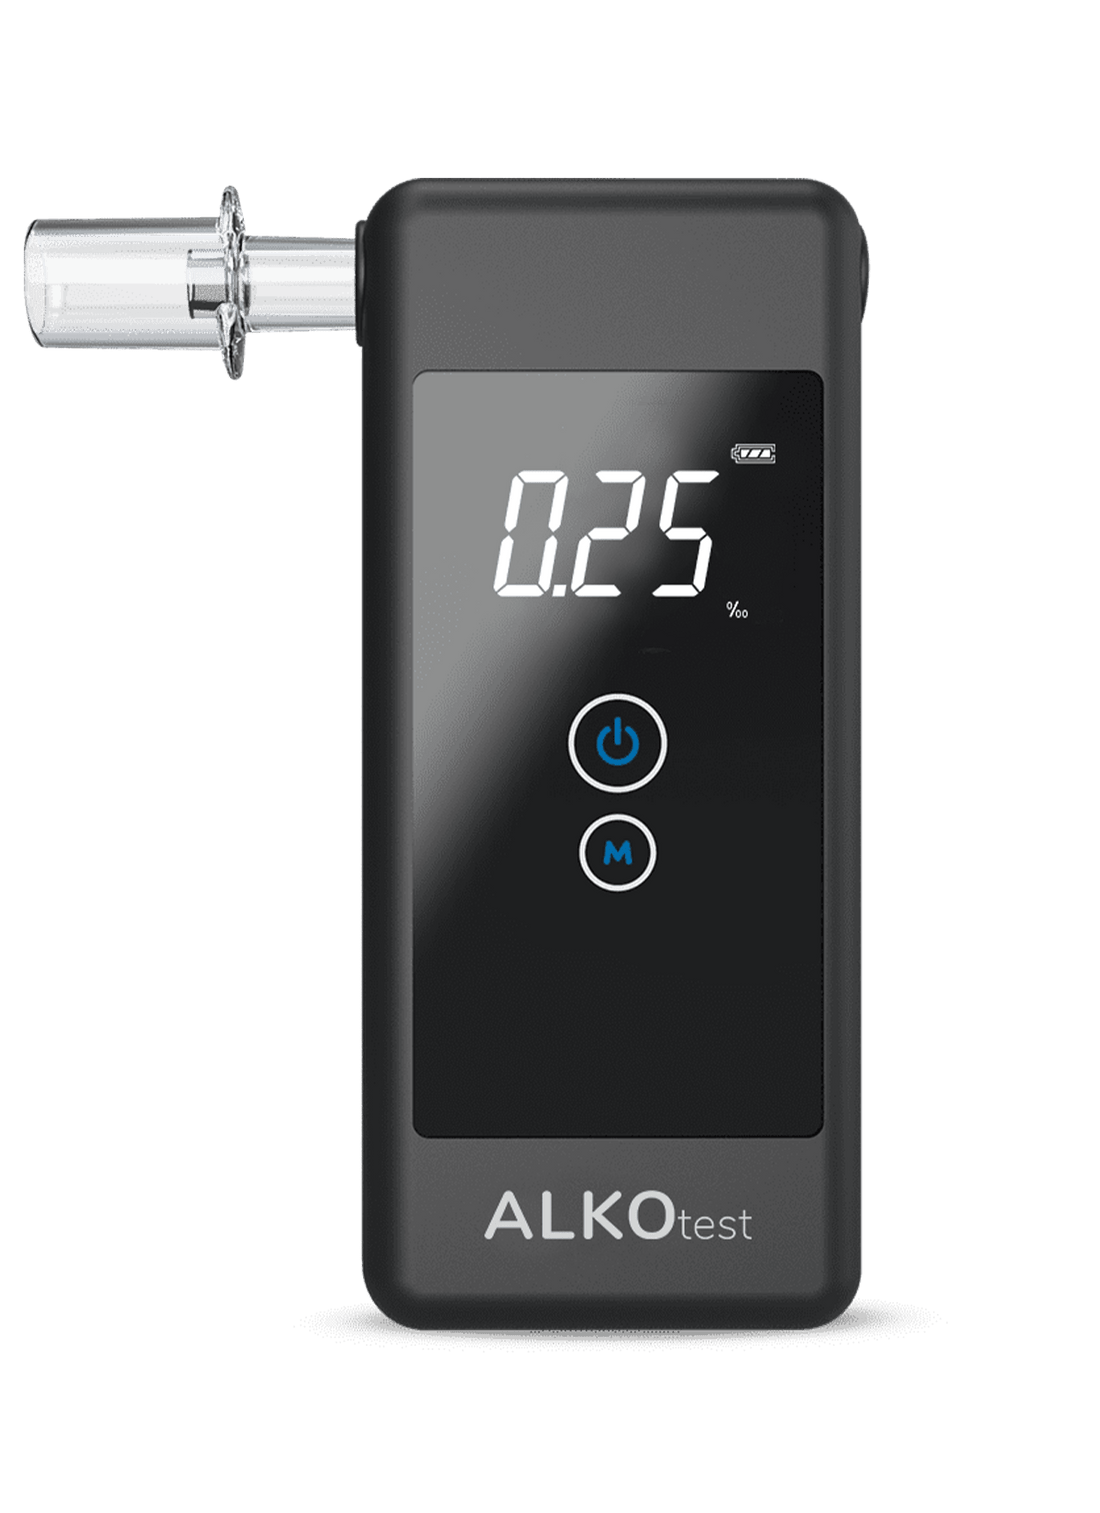 Alkometer ALKOtest AT 1.0